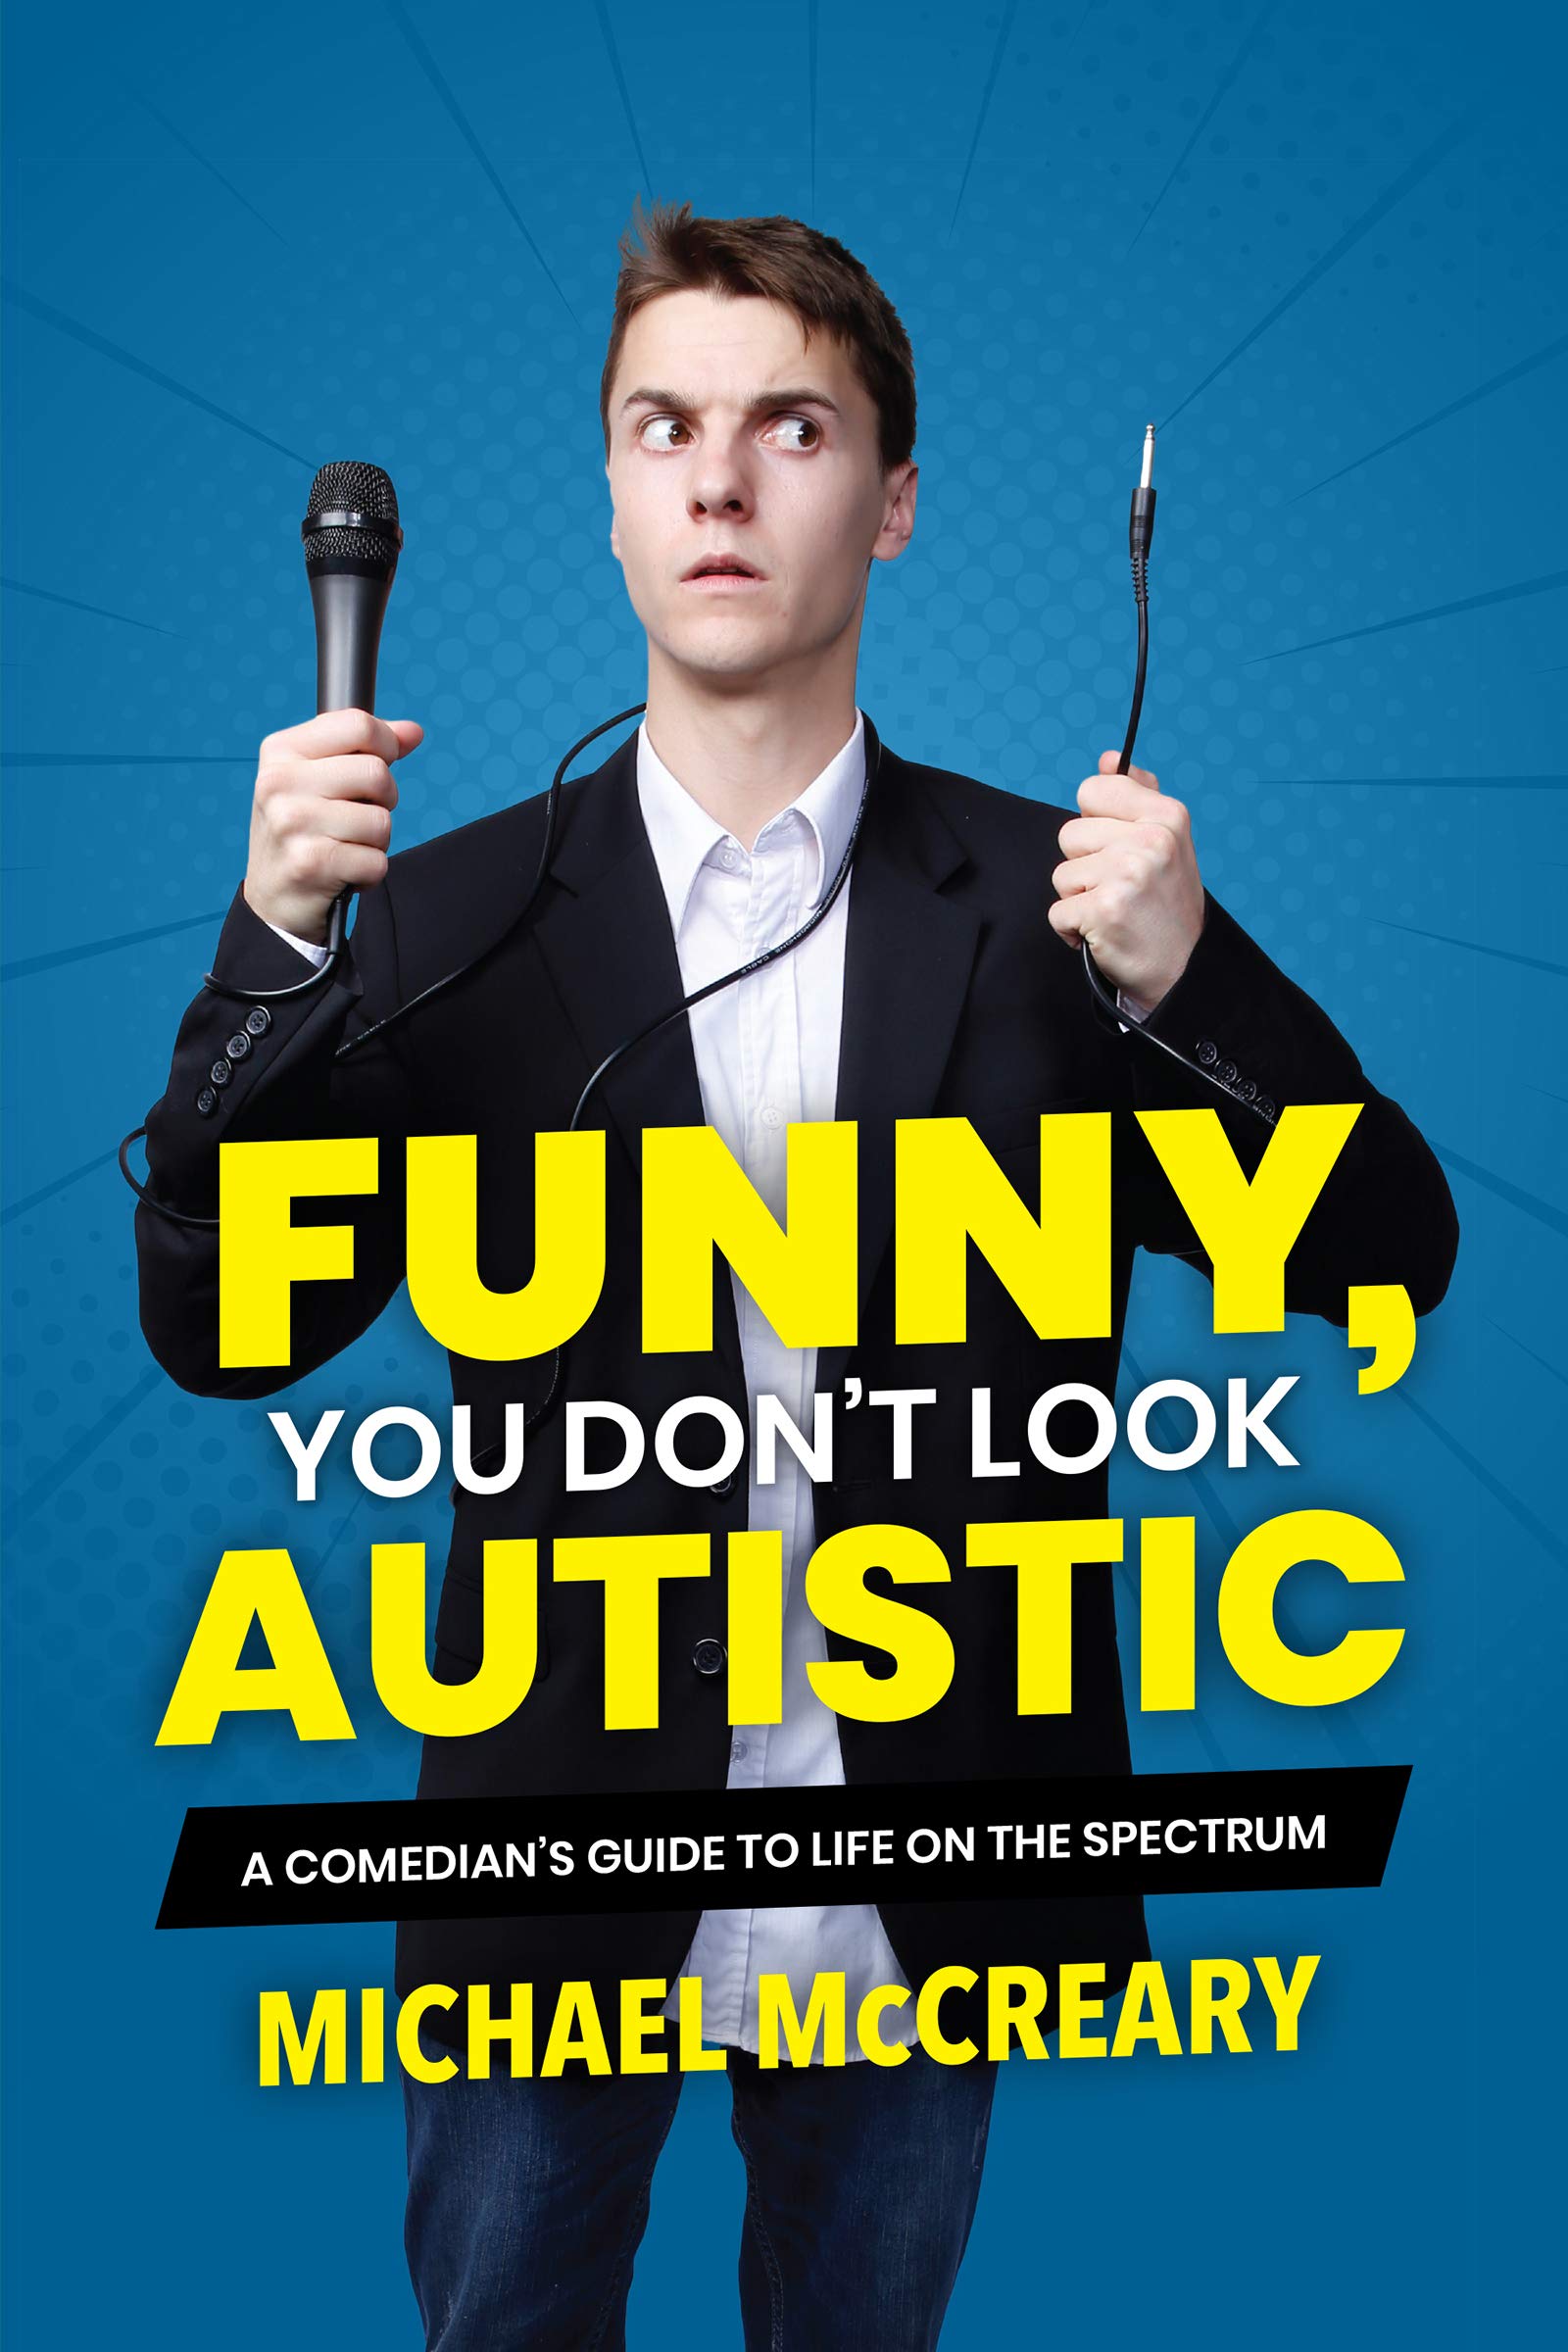 Funny, You Don’t Look Autistic: A Comedian’s Guide to Life on the Spectrum by Michael McCreary